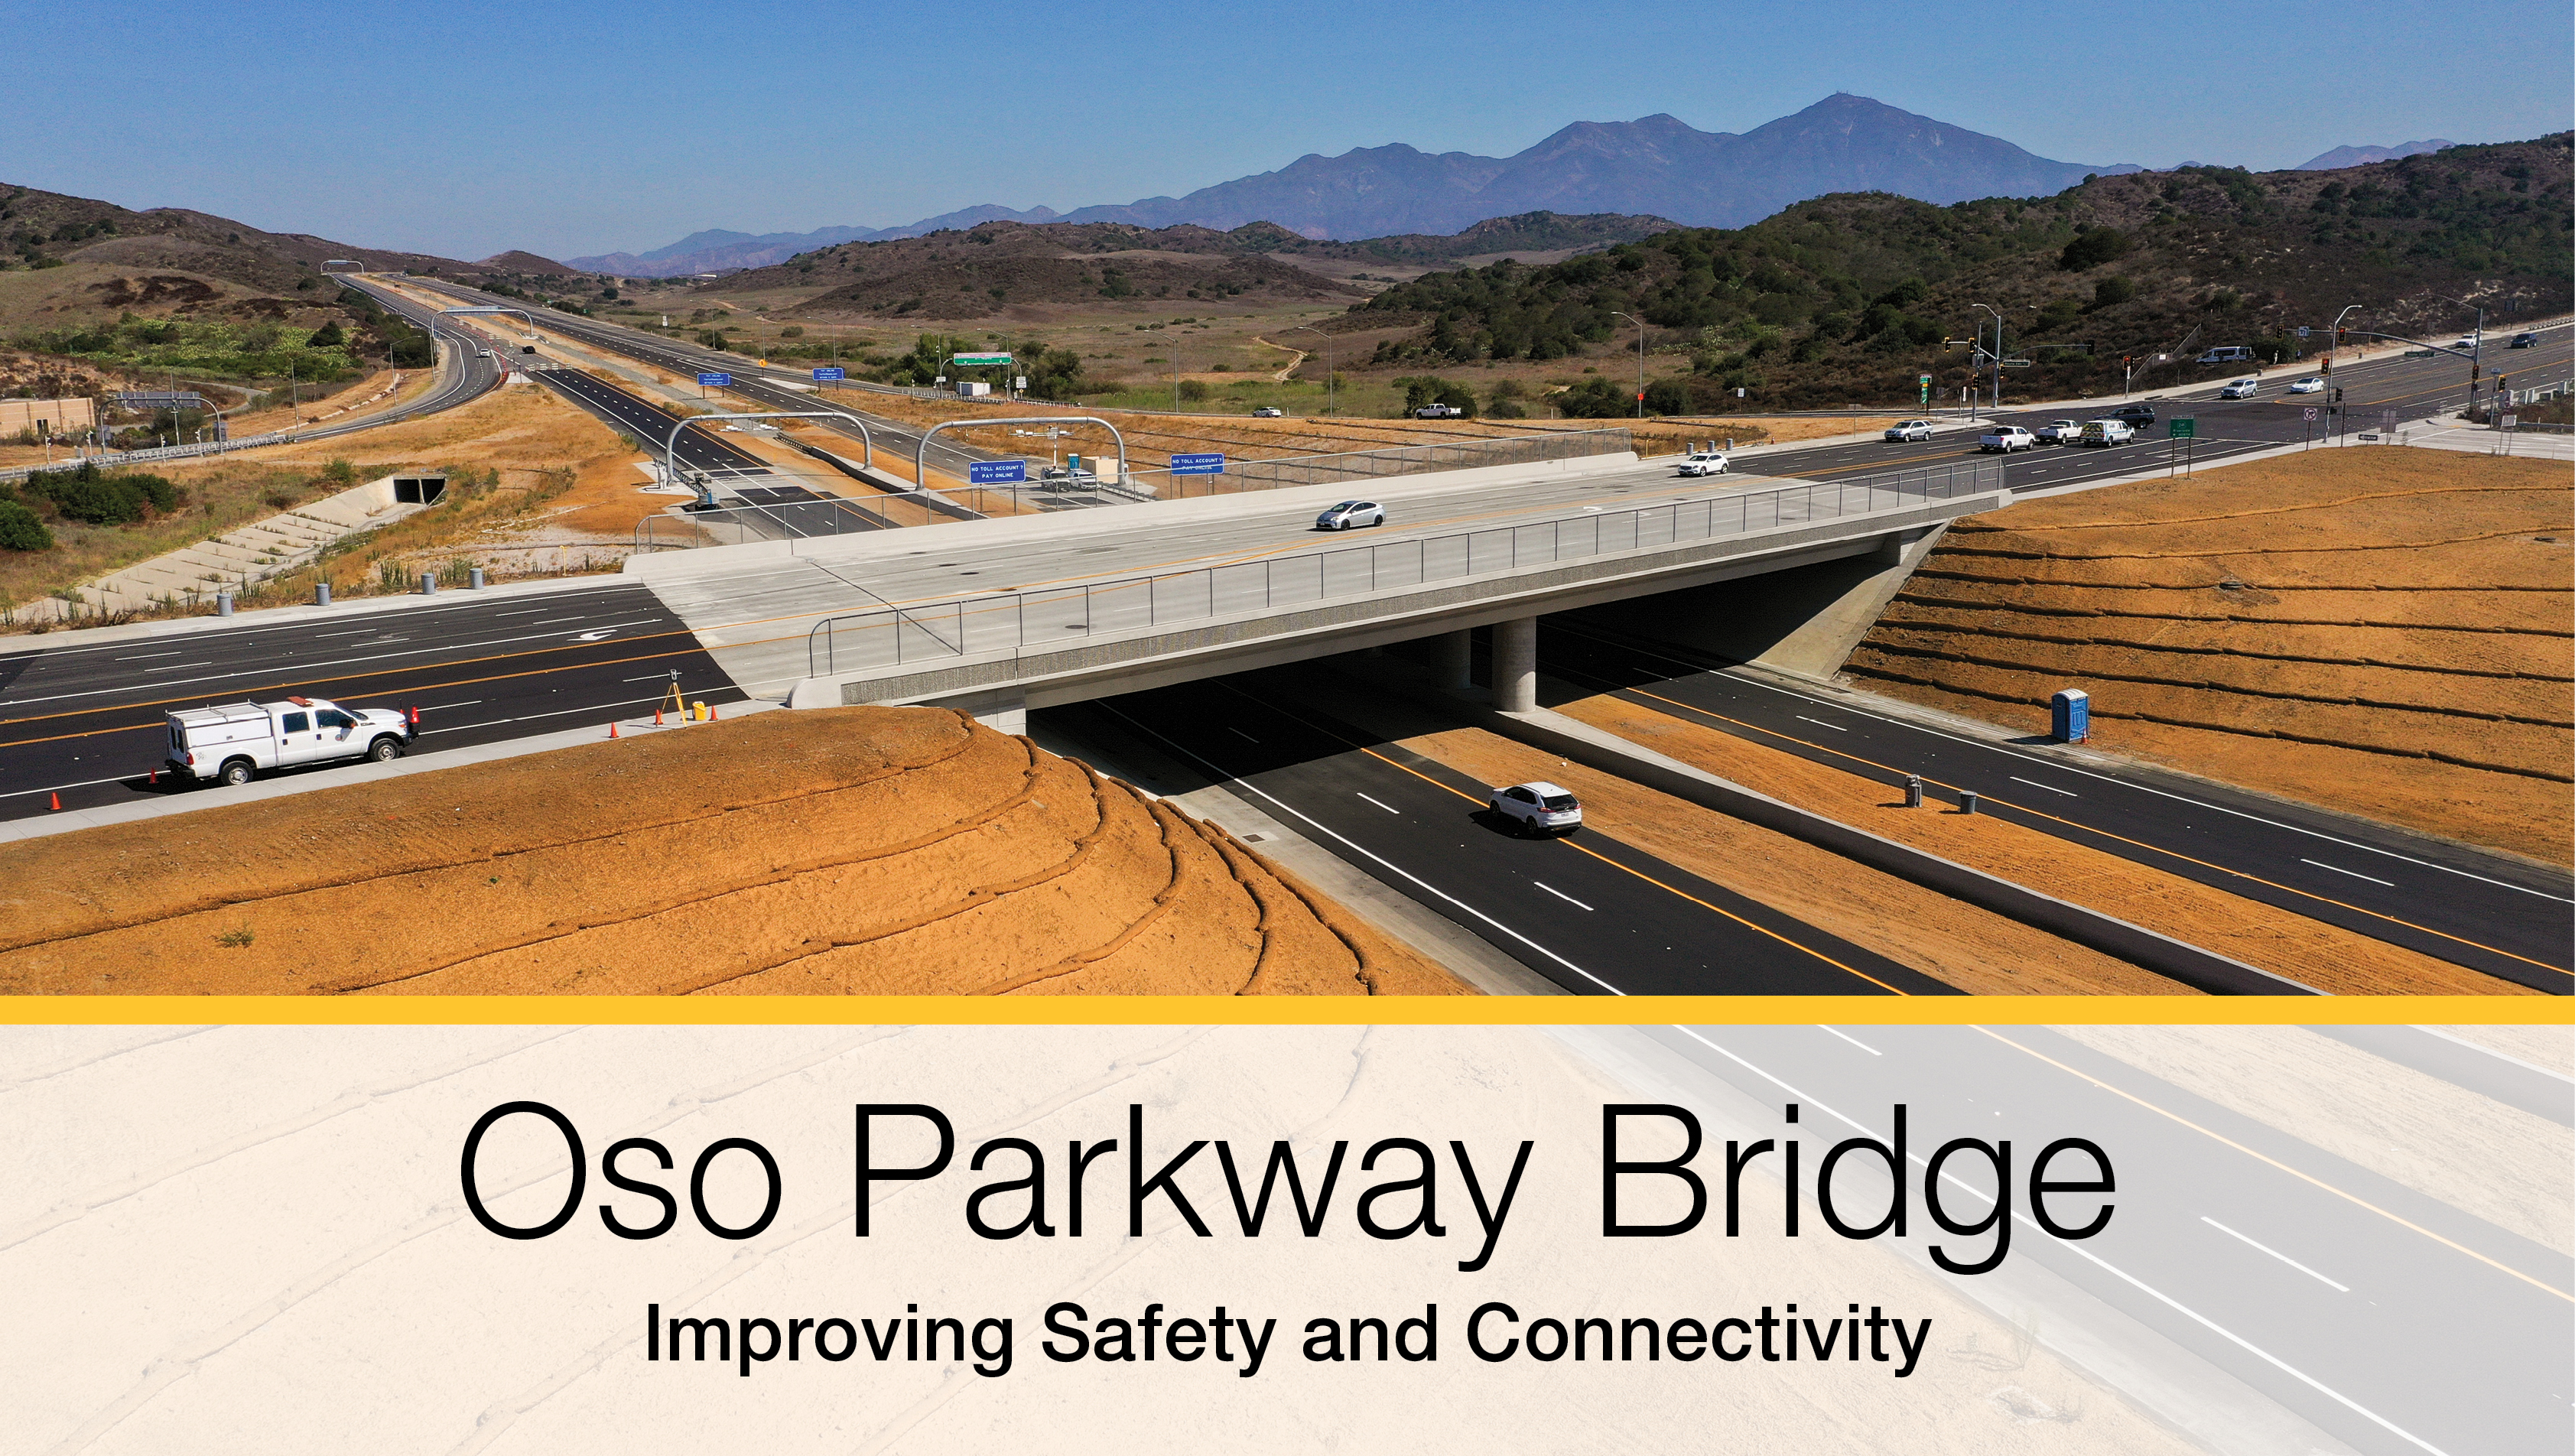 Oso Parkway Bridge - Improving Safety and Connectivity